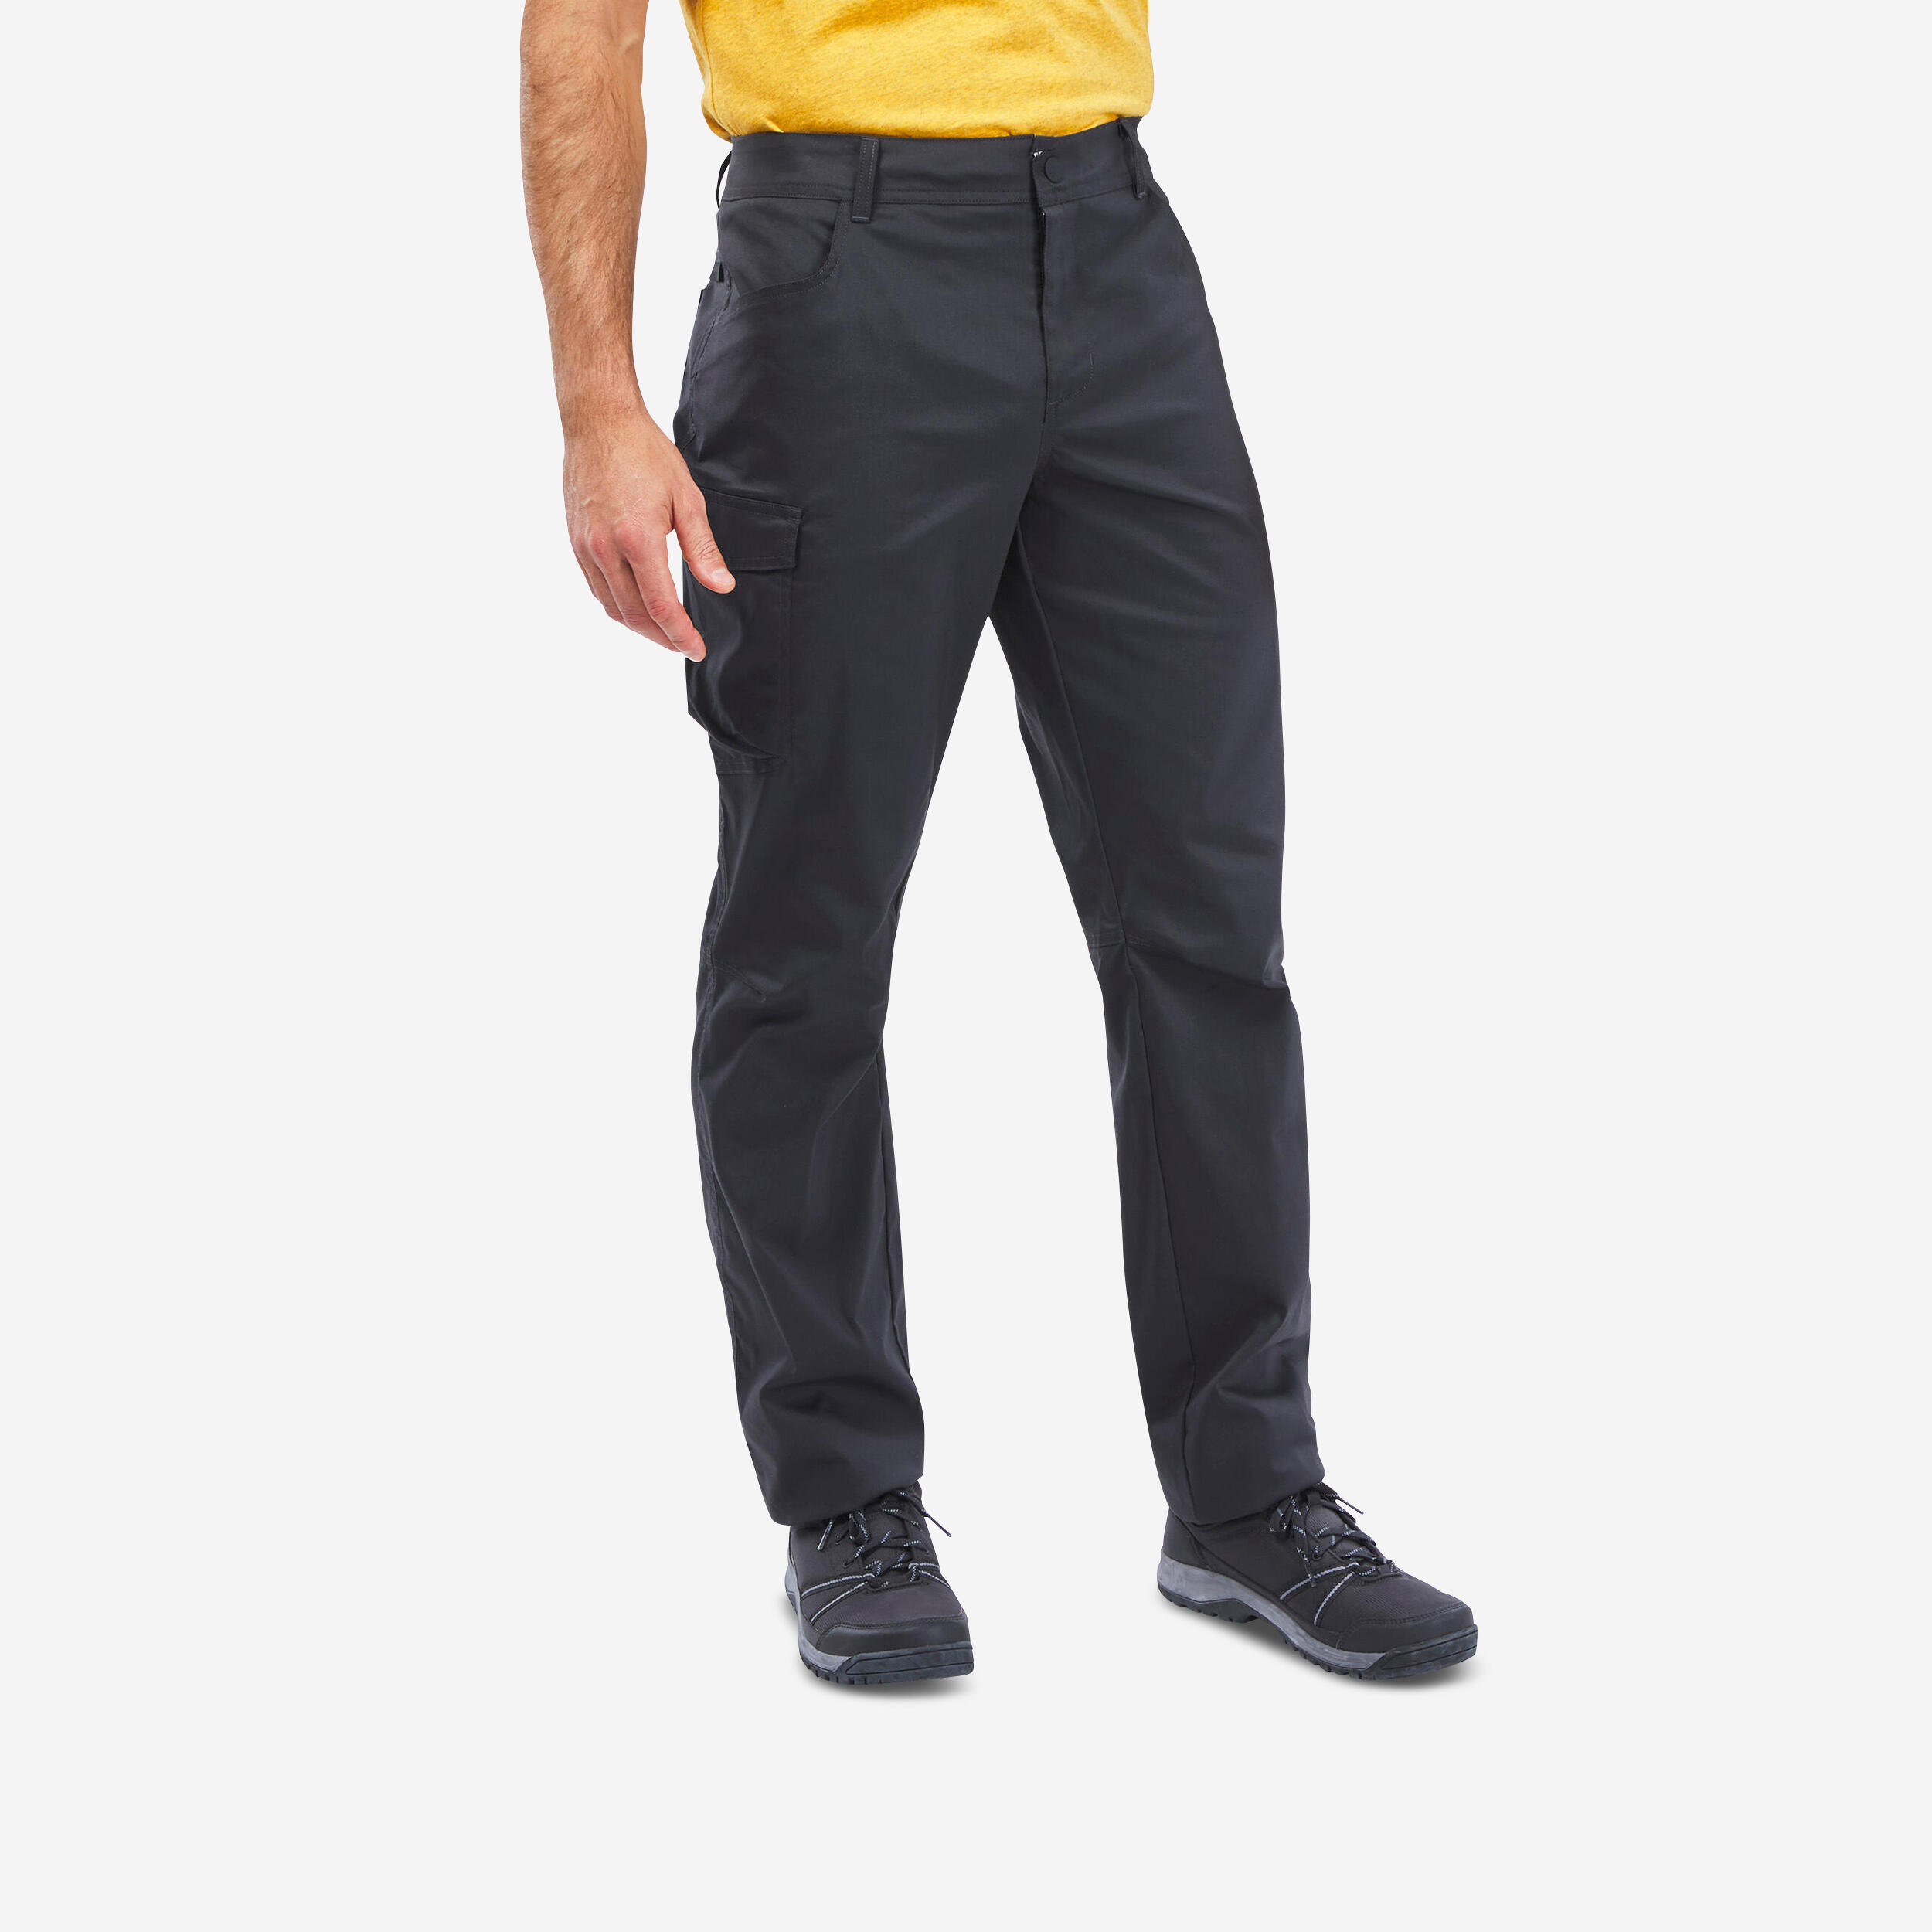 Best walking trousers tested and reviewed